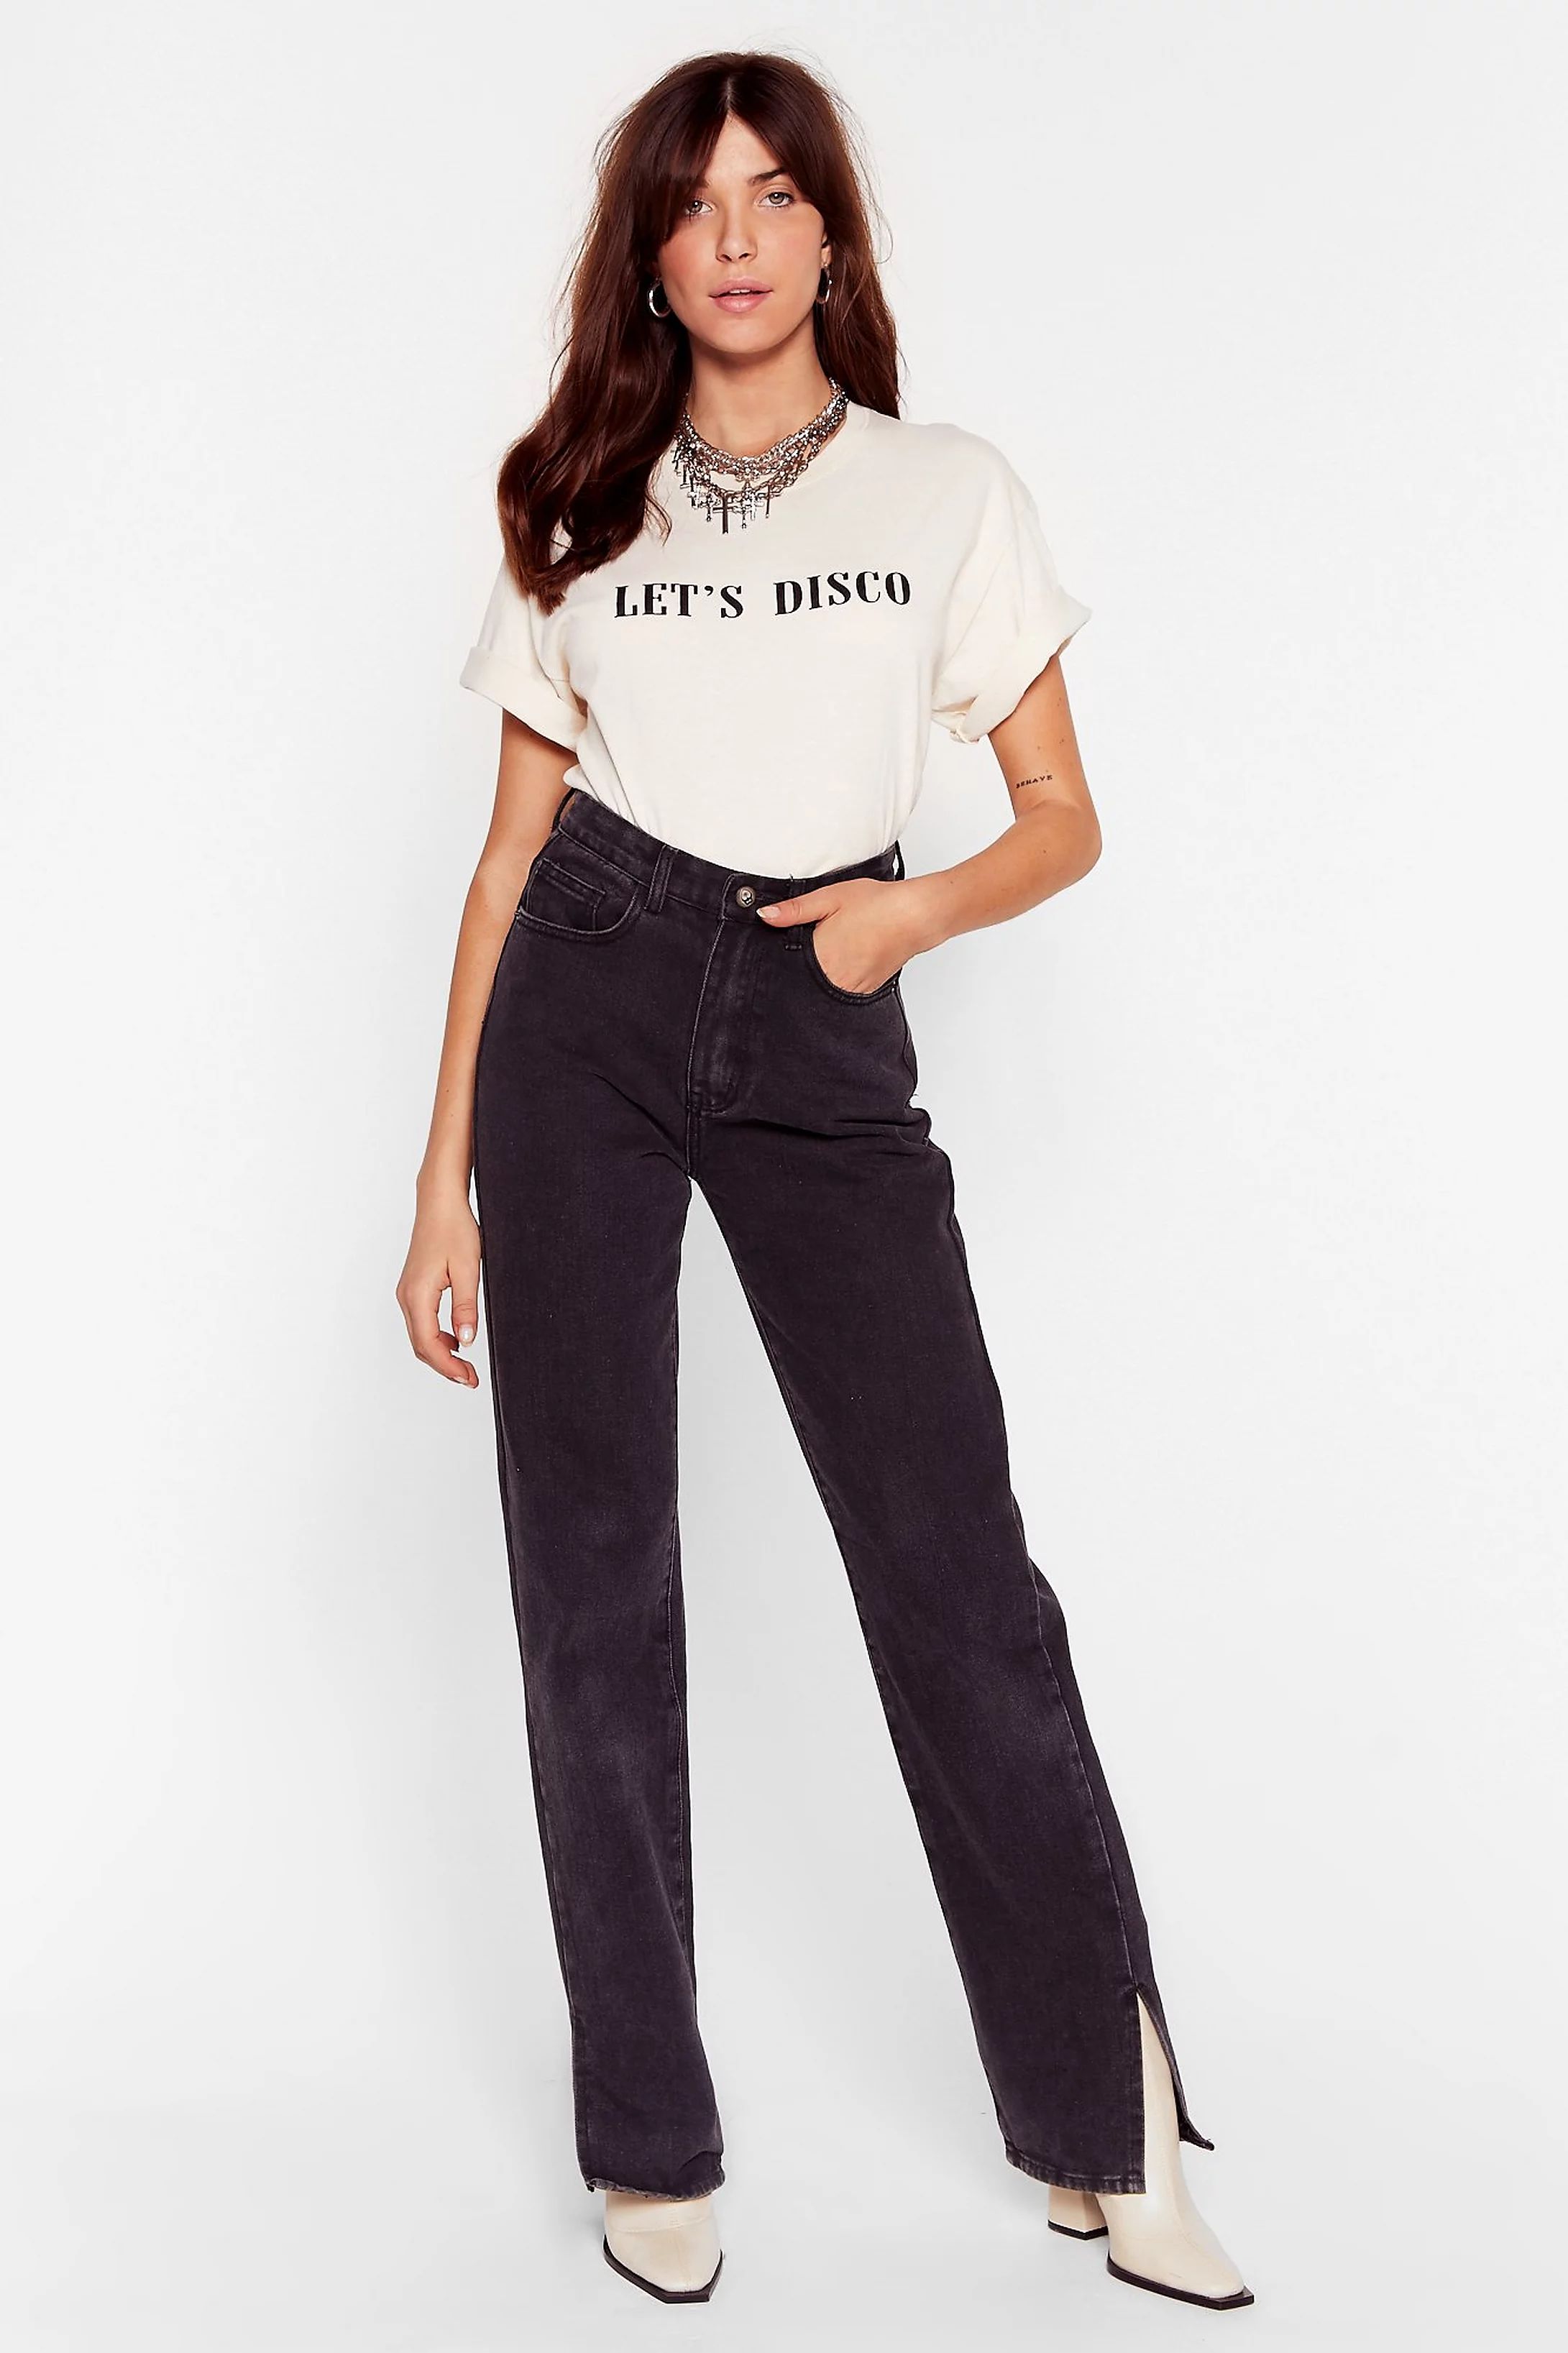 Let's Disco Graphic T-Shirt | Nasty Gal (US)